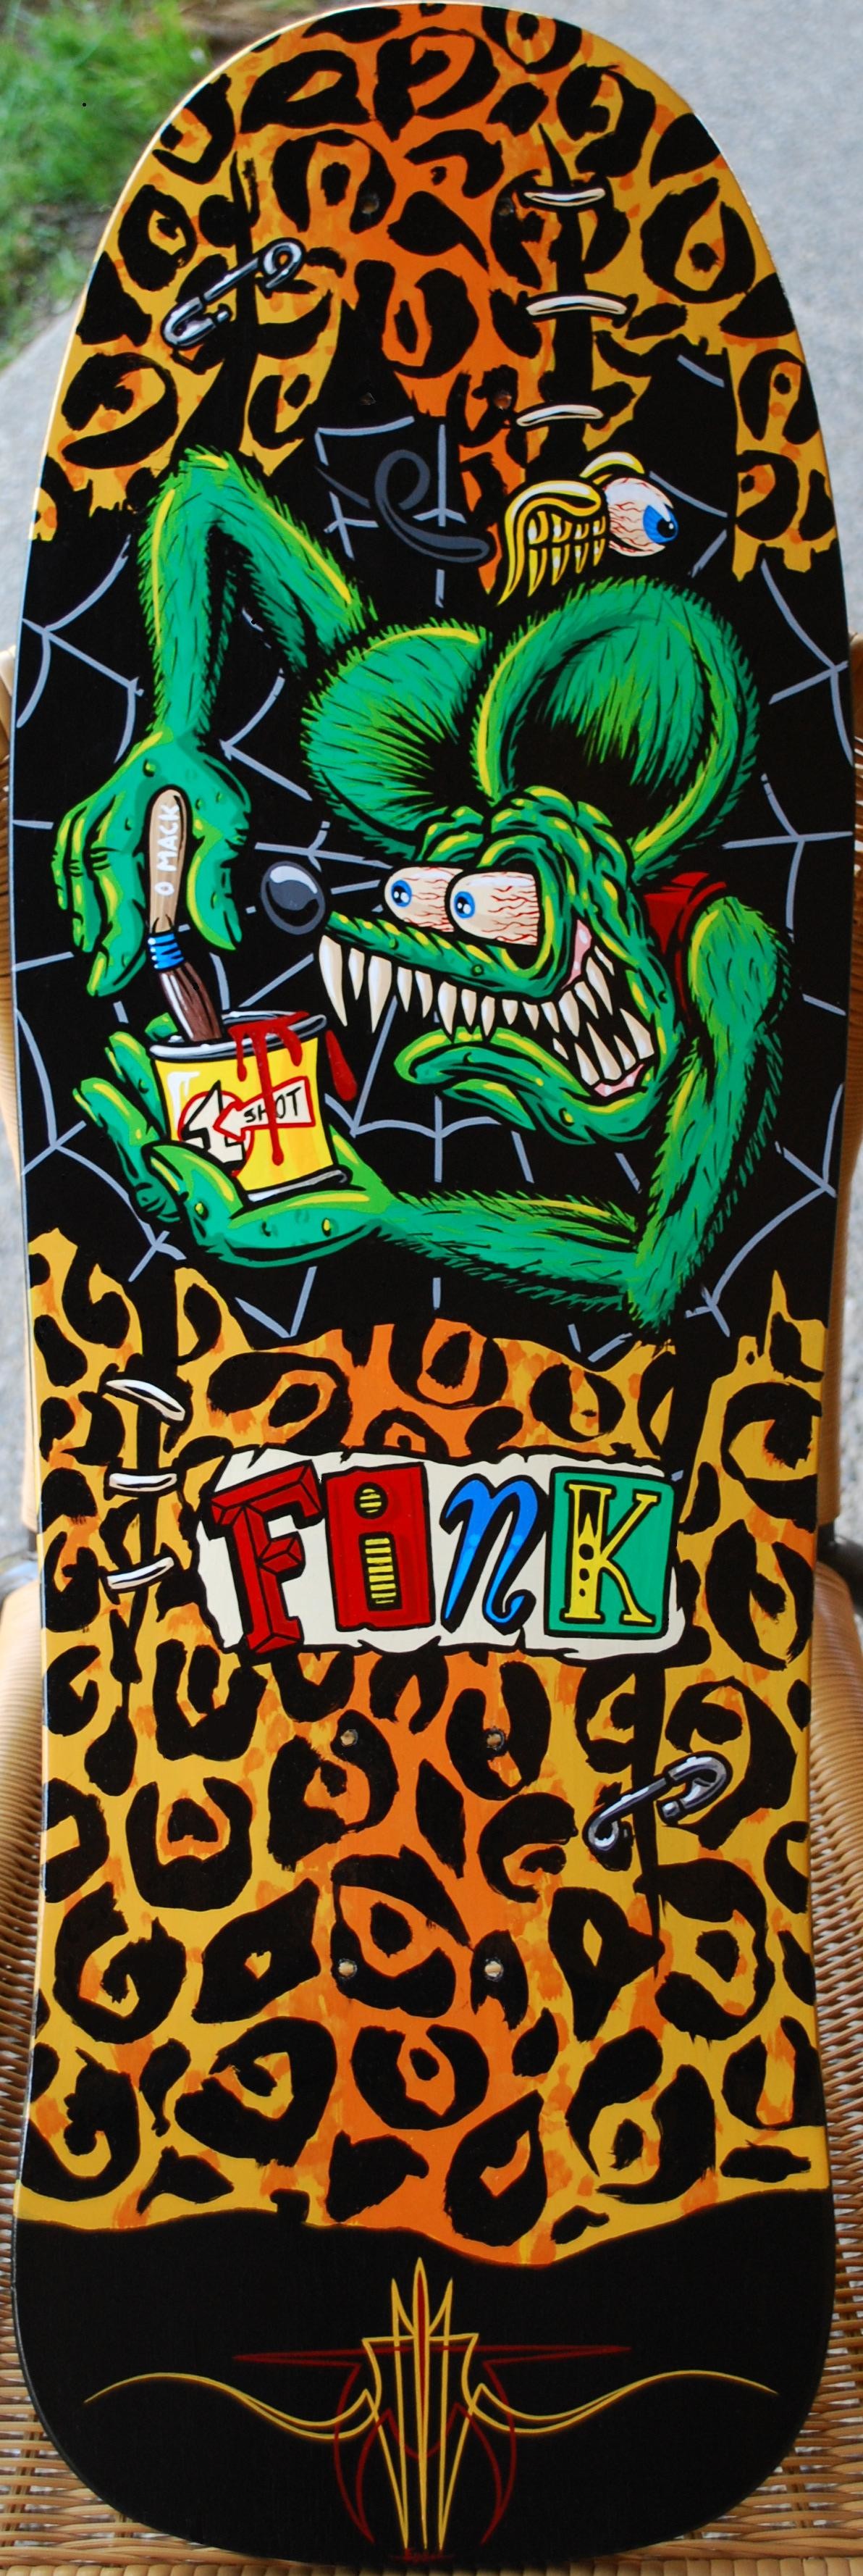 1192x3556 Pin Rat Fink Wallpaper 10 From 39 Votes 1 40 on Pinterest